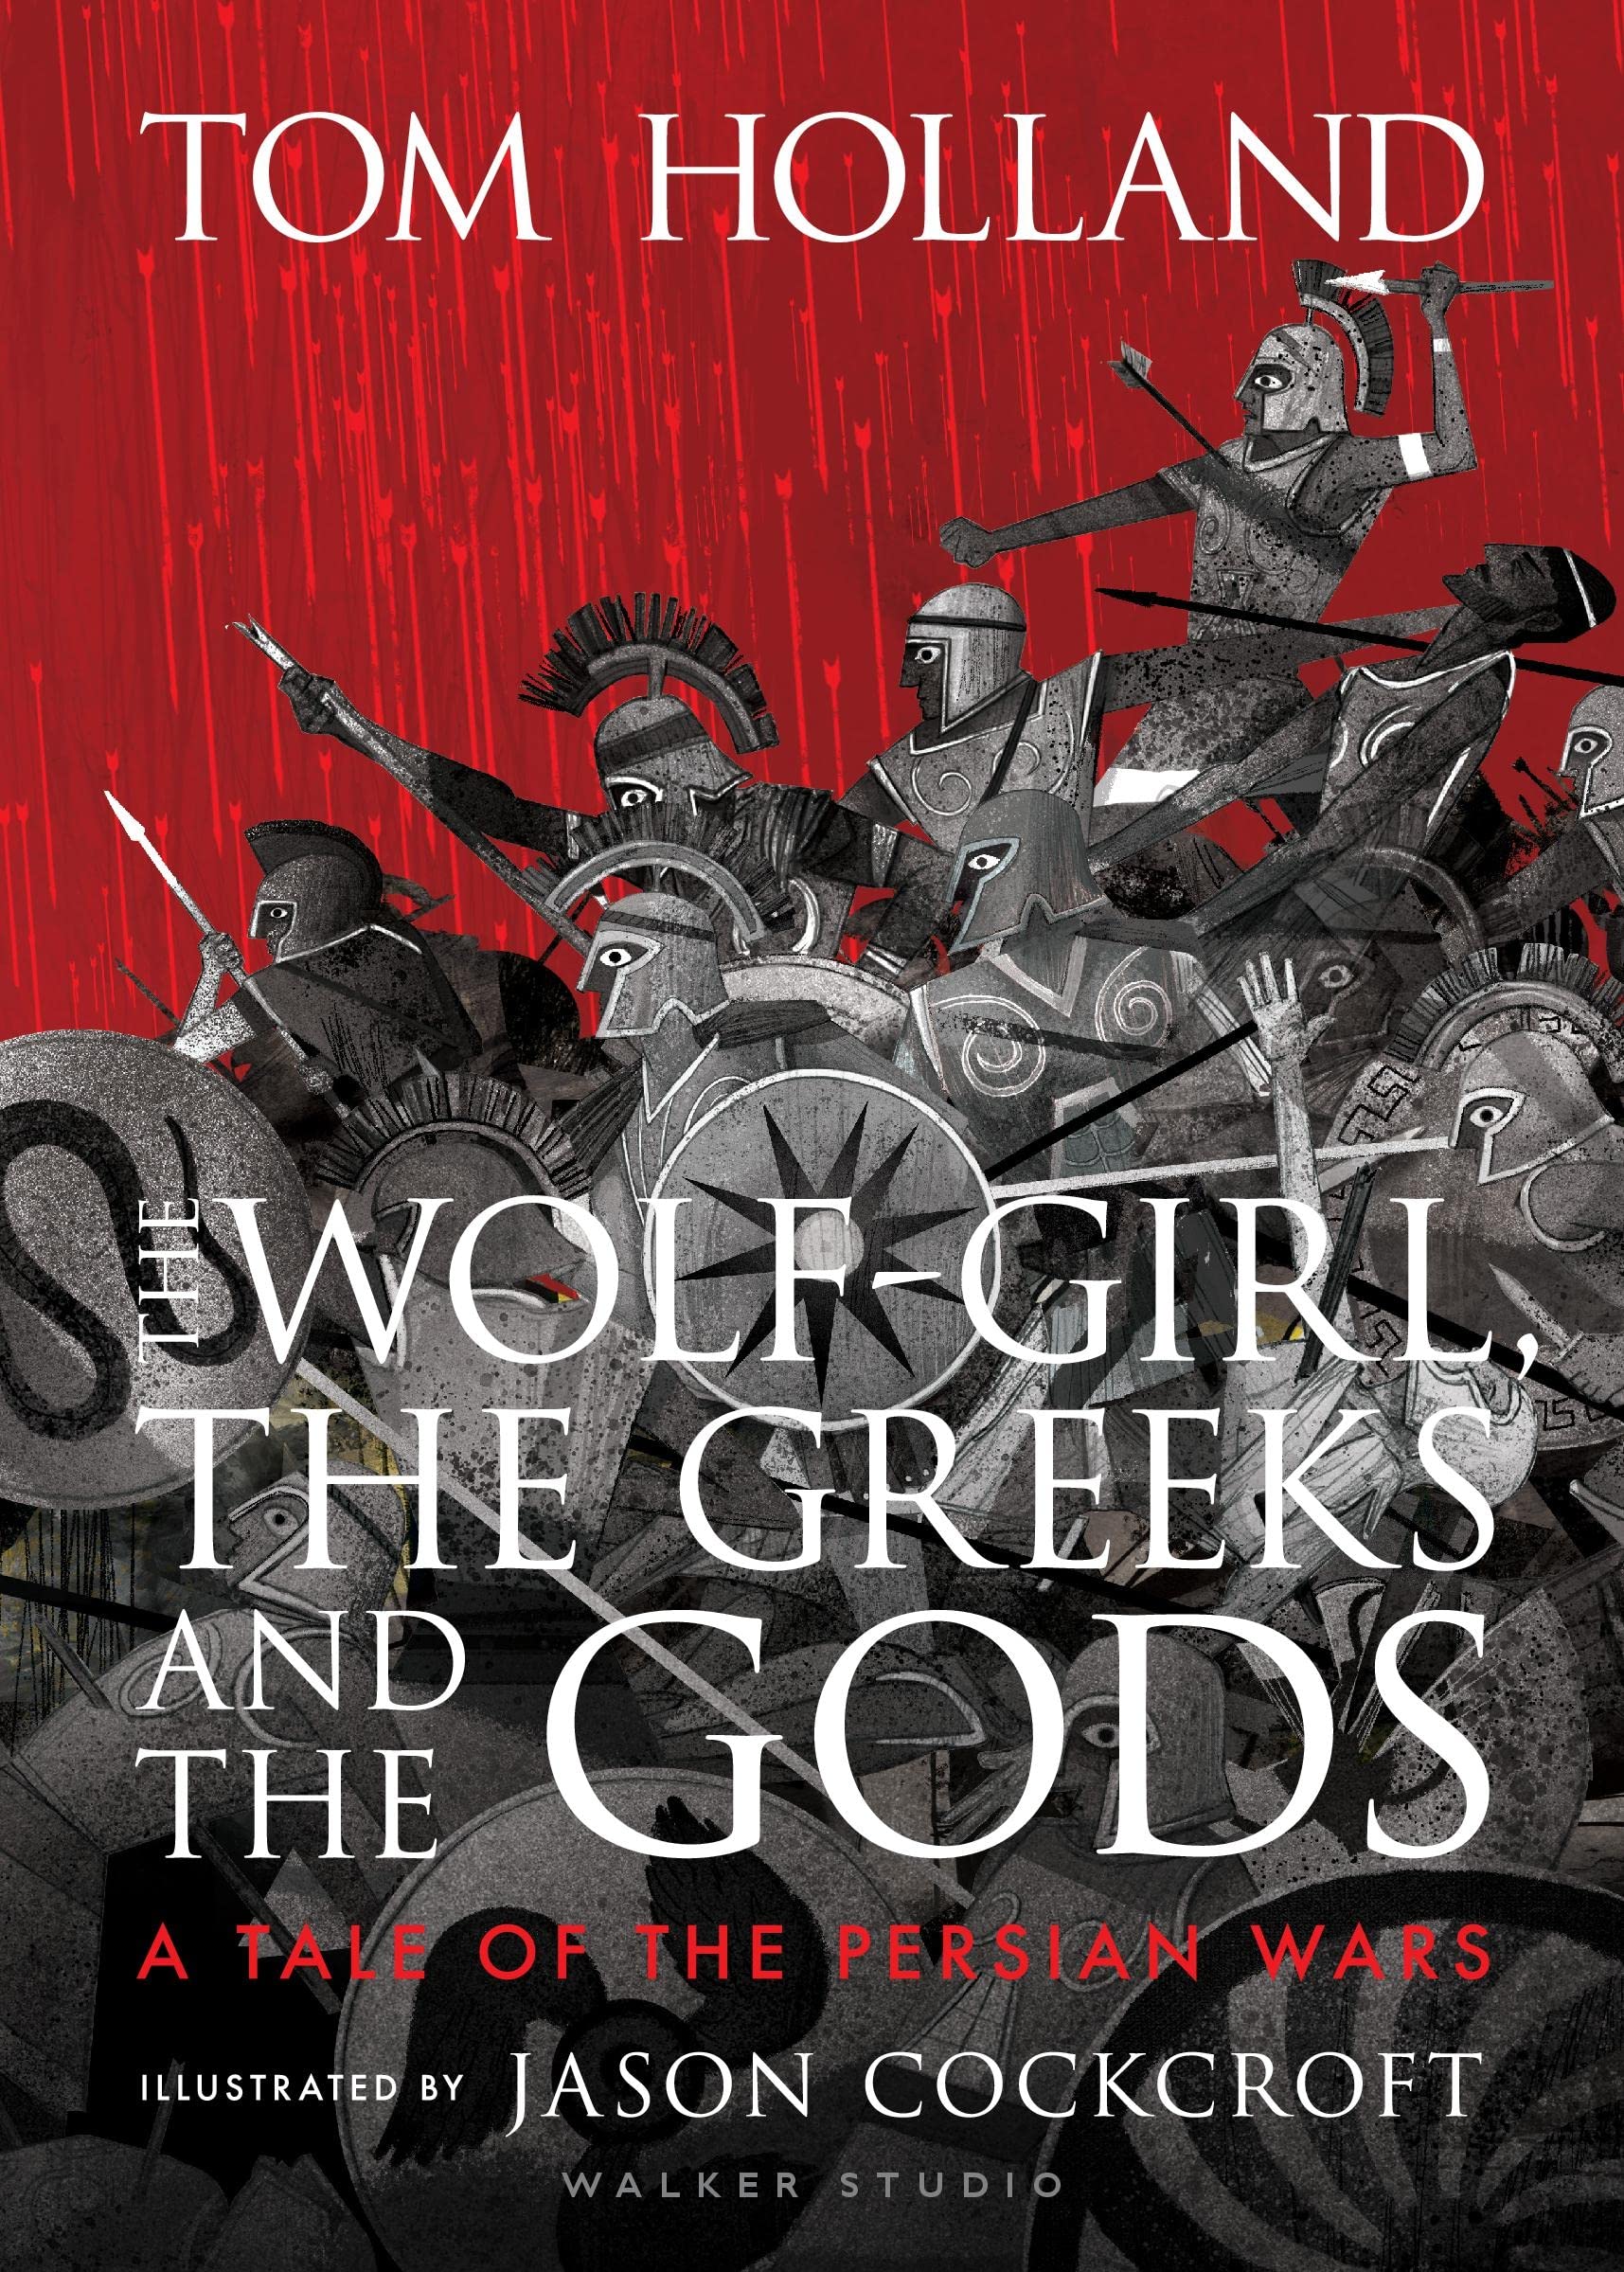 The Wolf-Girl, the Greeks and the Gods